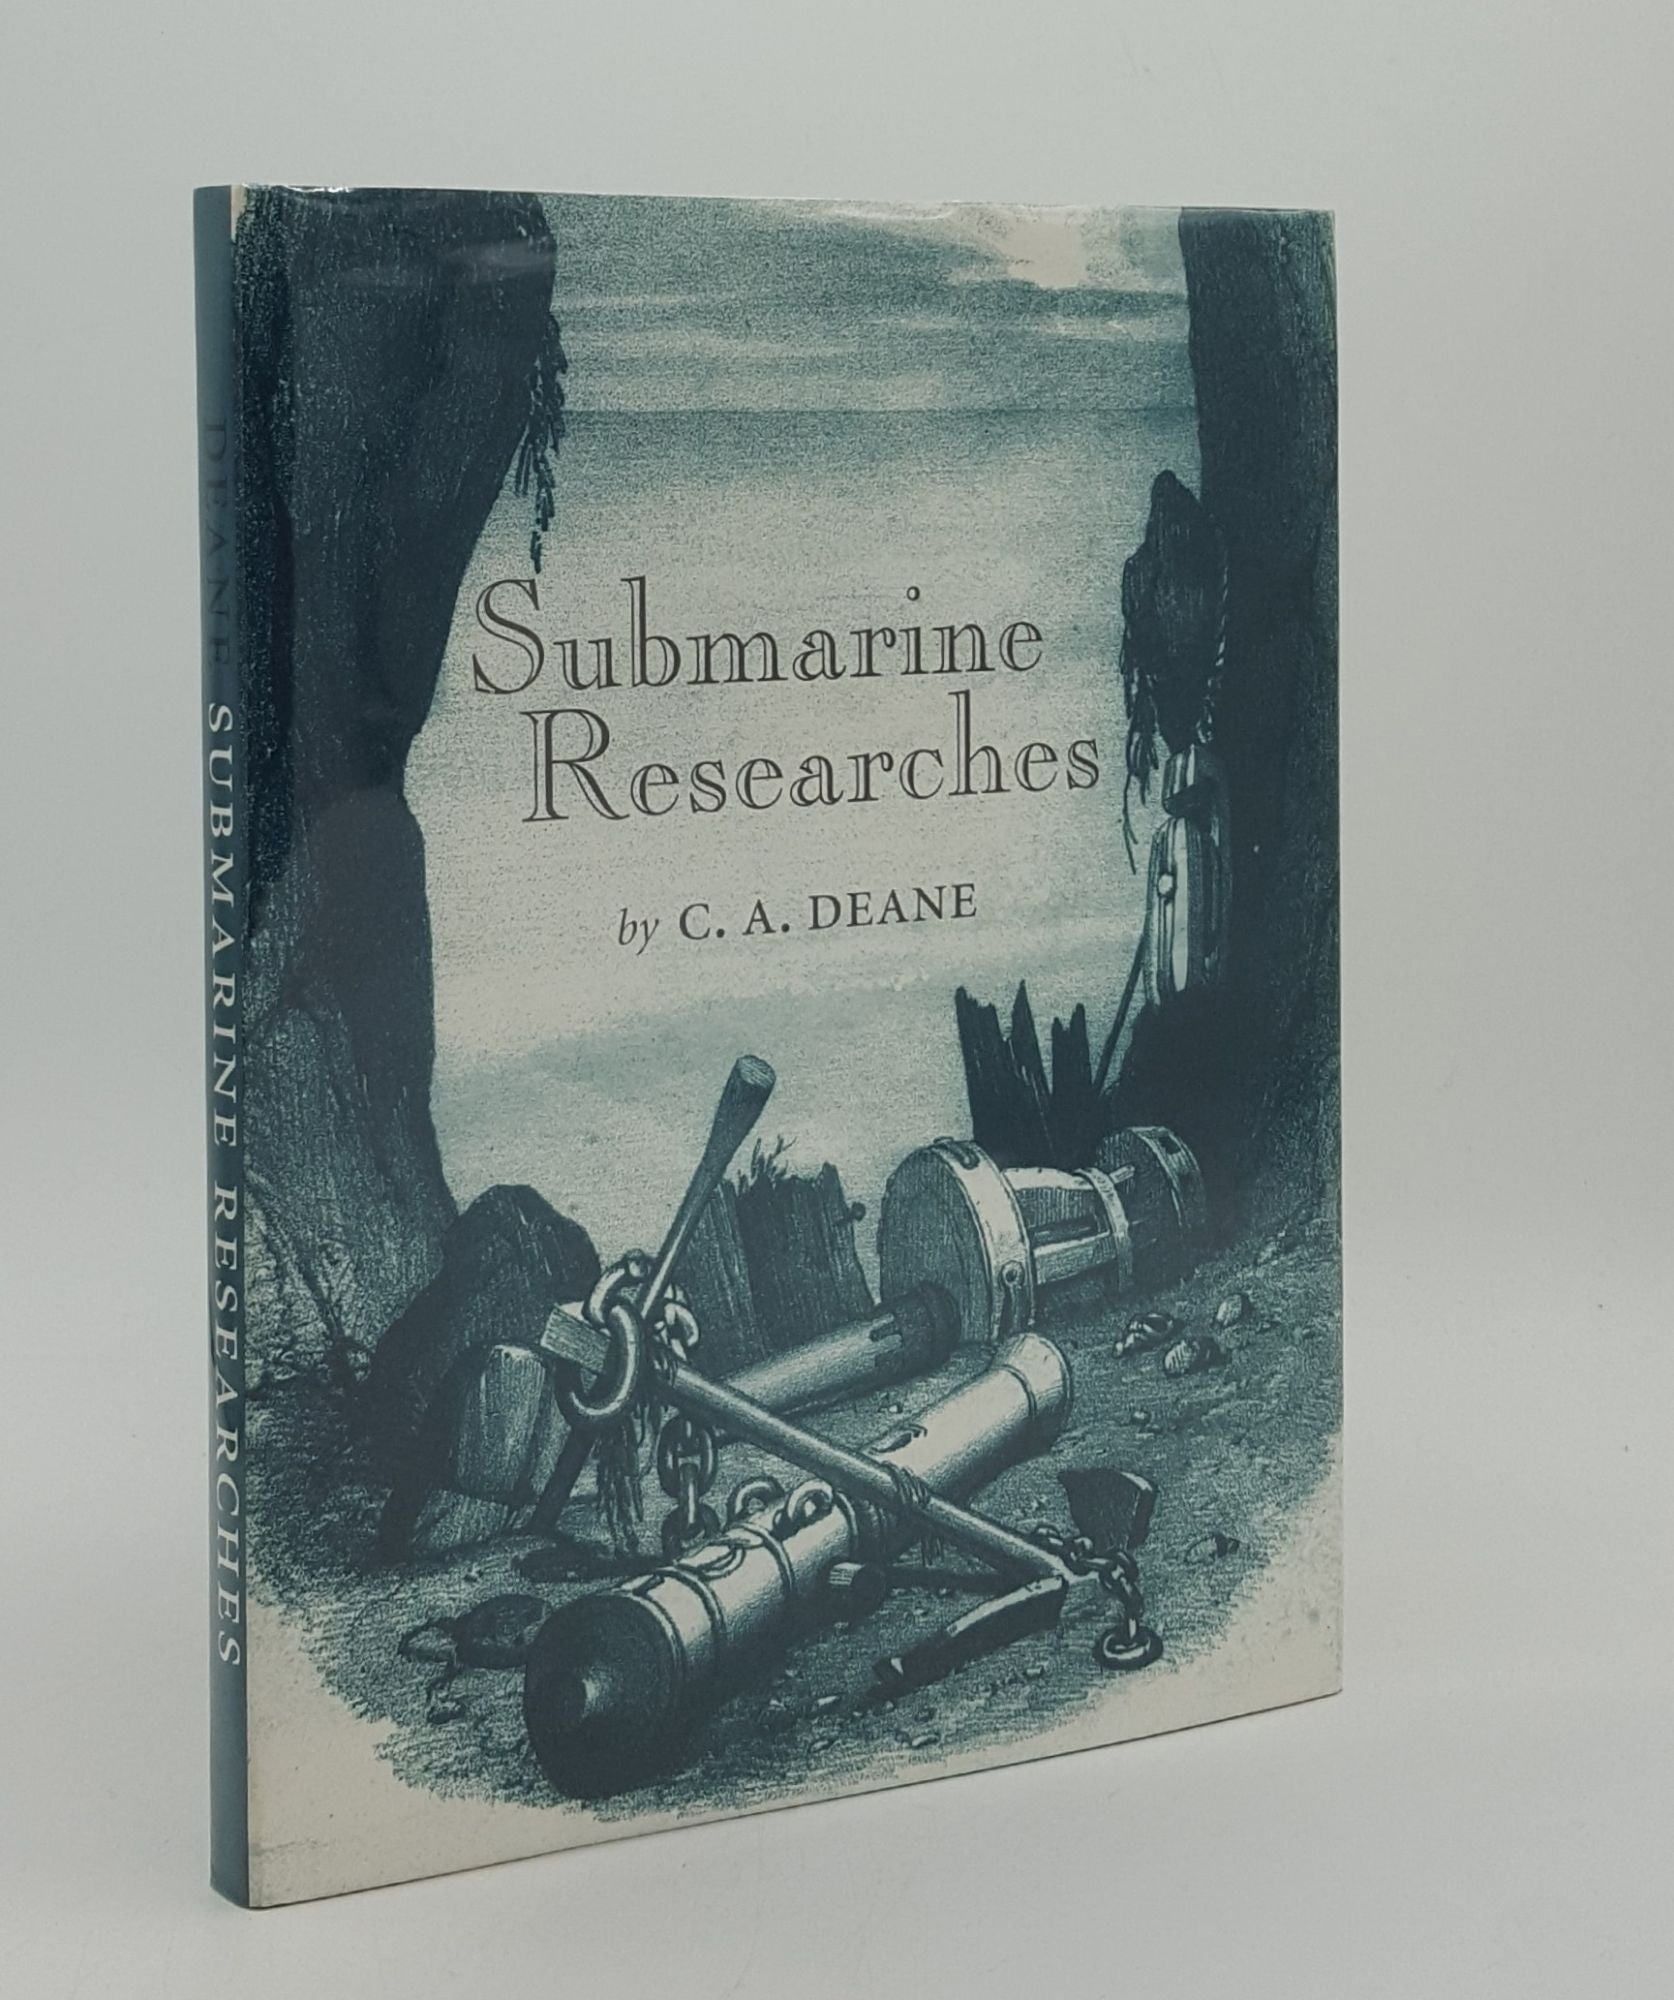 DEANE C.A. - Submarine Researches on the Wrecks of His Majesty's Late Ships Royal George Boyne and Others